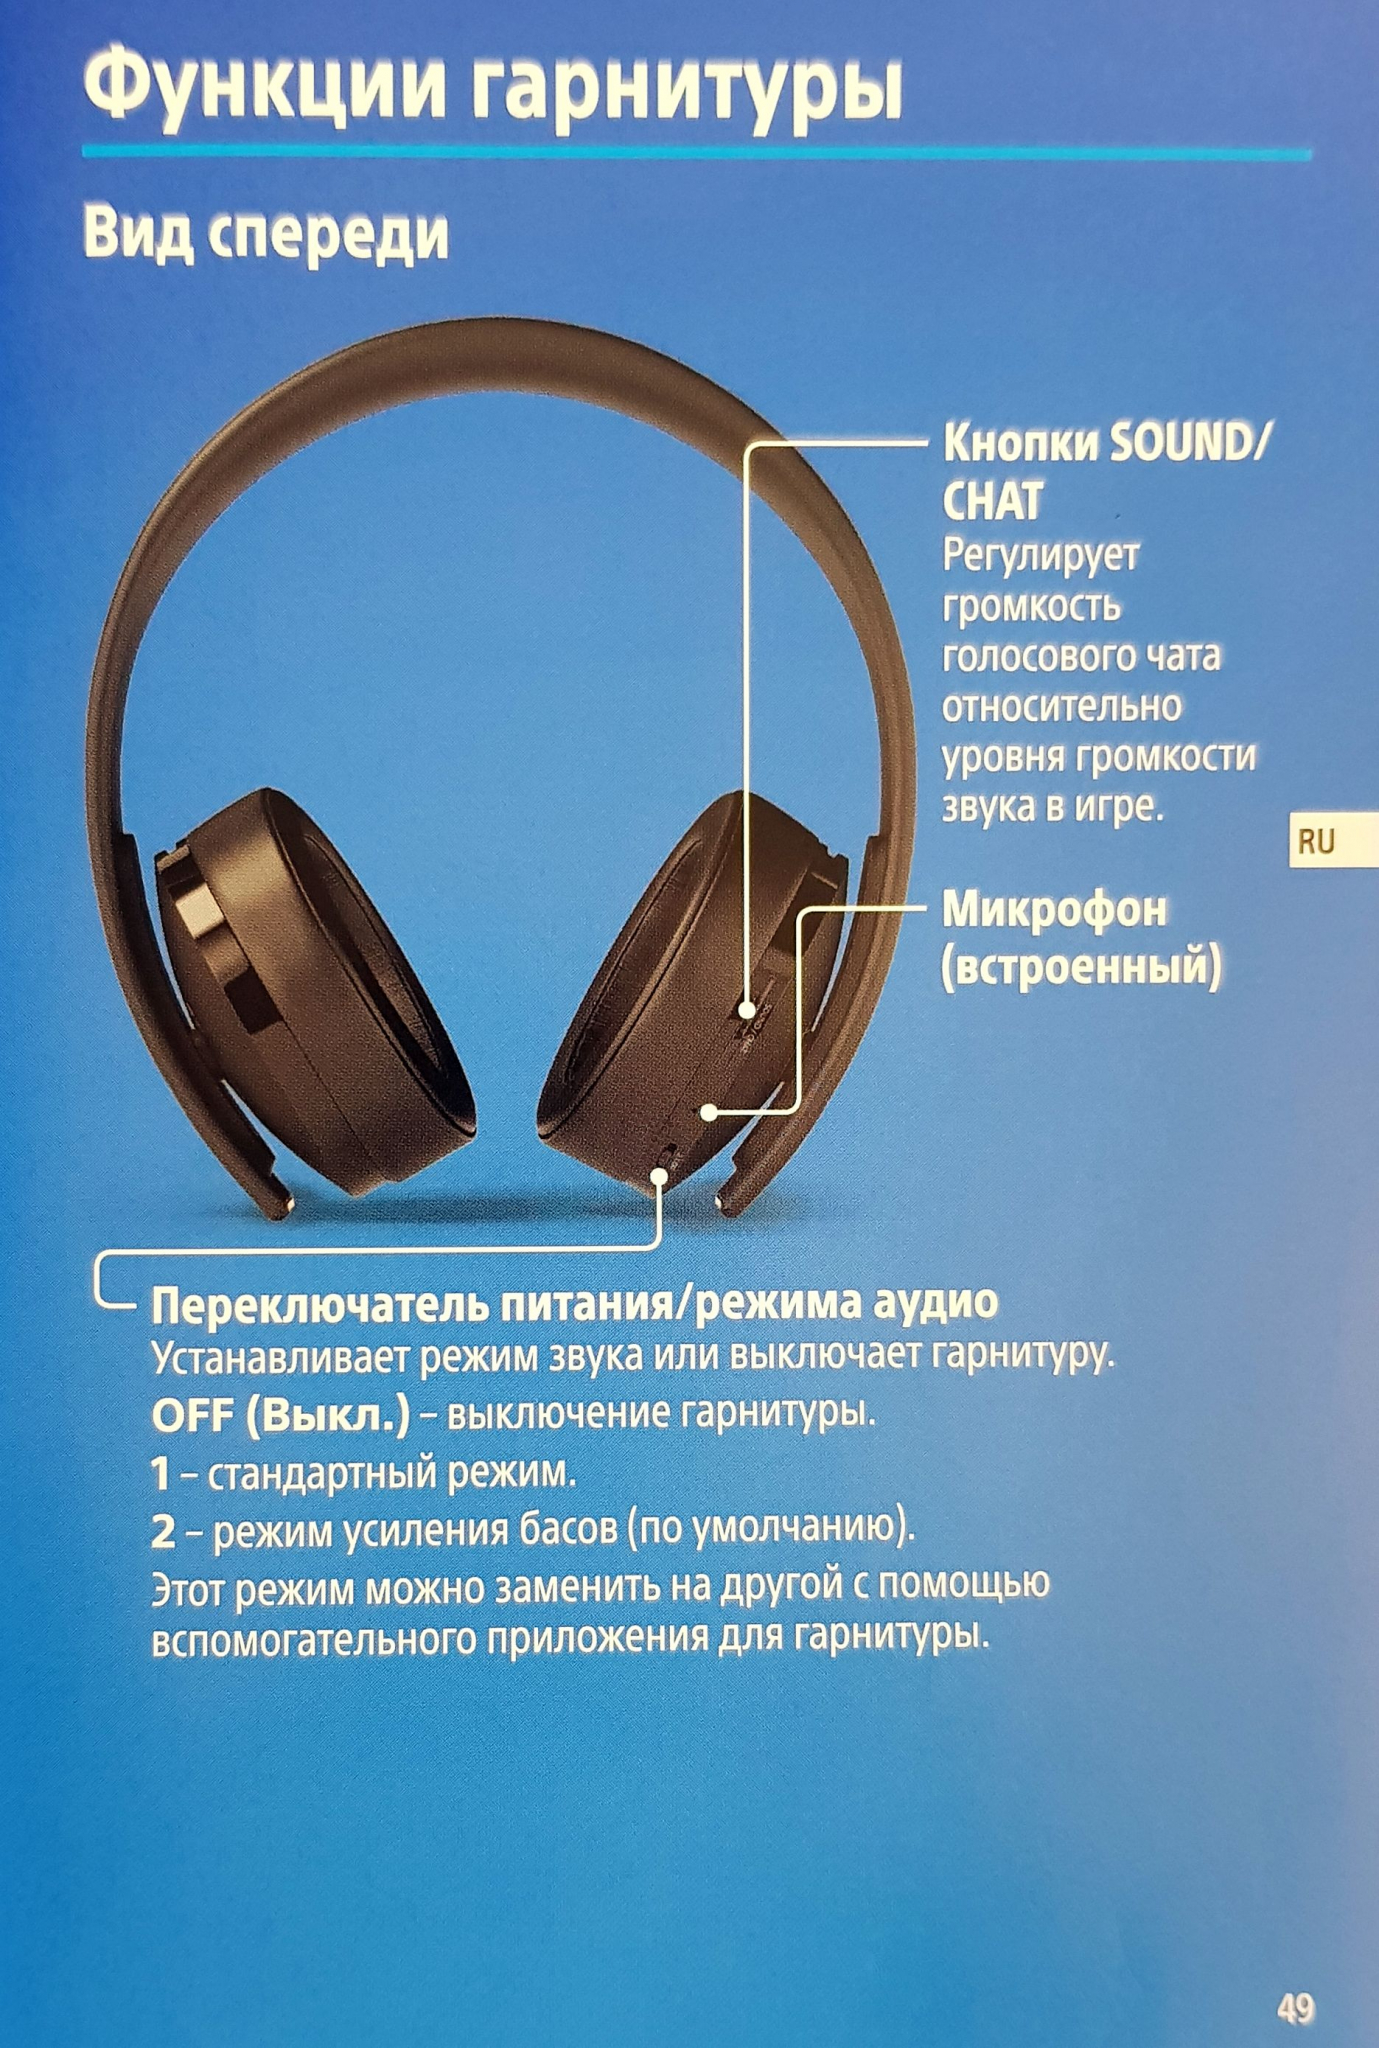 2.0 headset chat audio sony footer_community